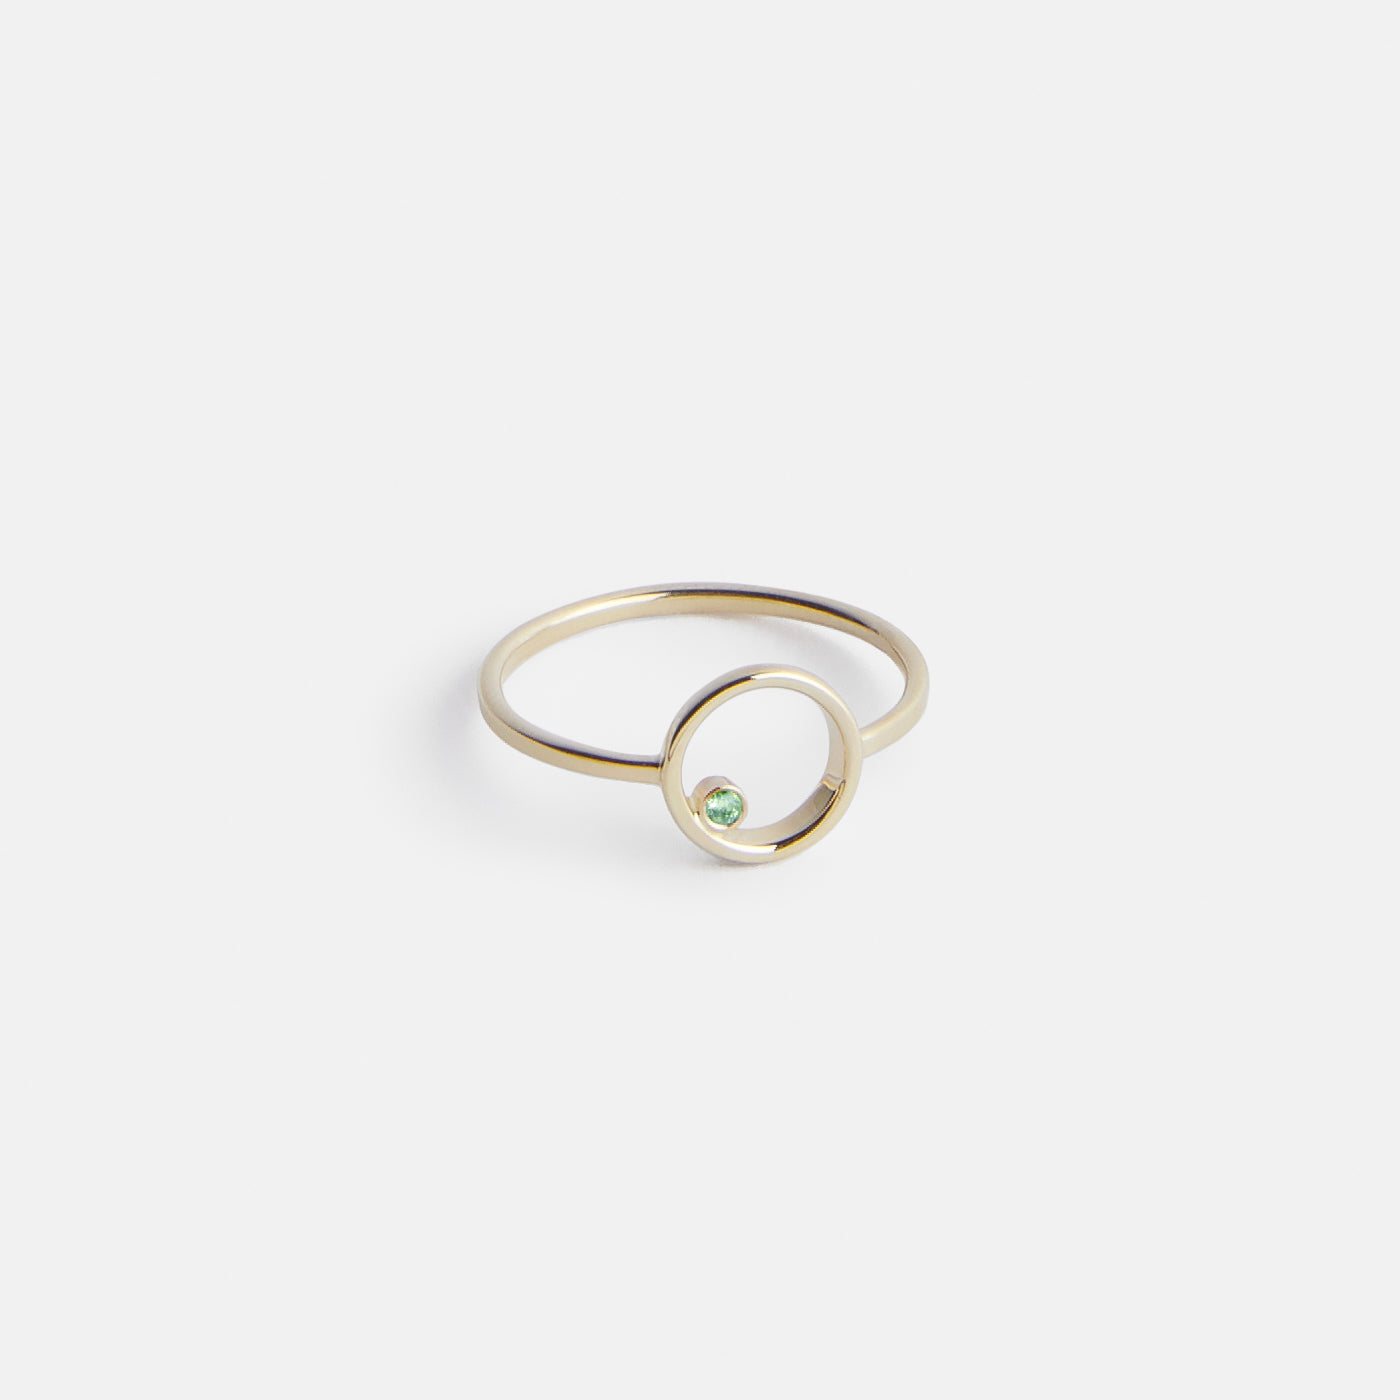 Ila Handmade Ring in 14k Gold set with Green Diamond by SHW Fine Jewelry NYC